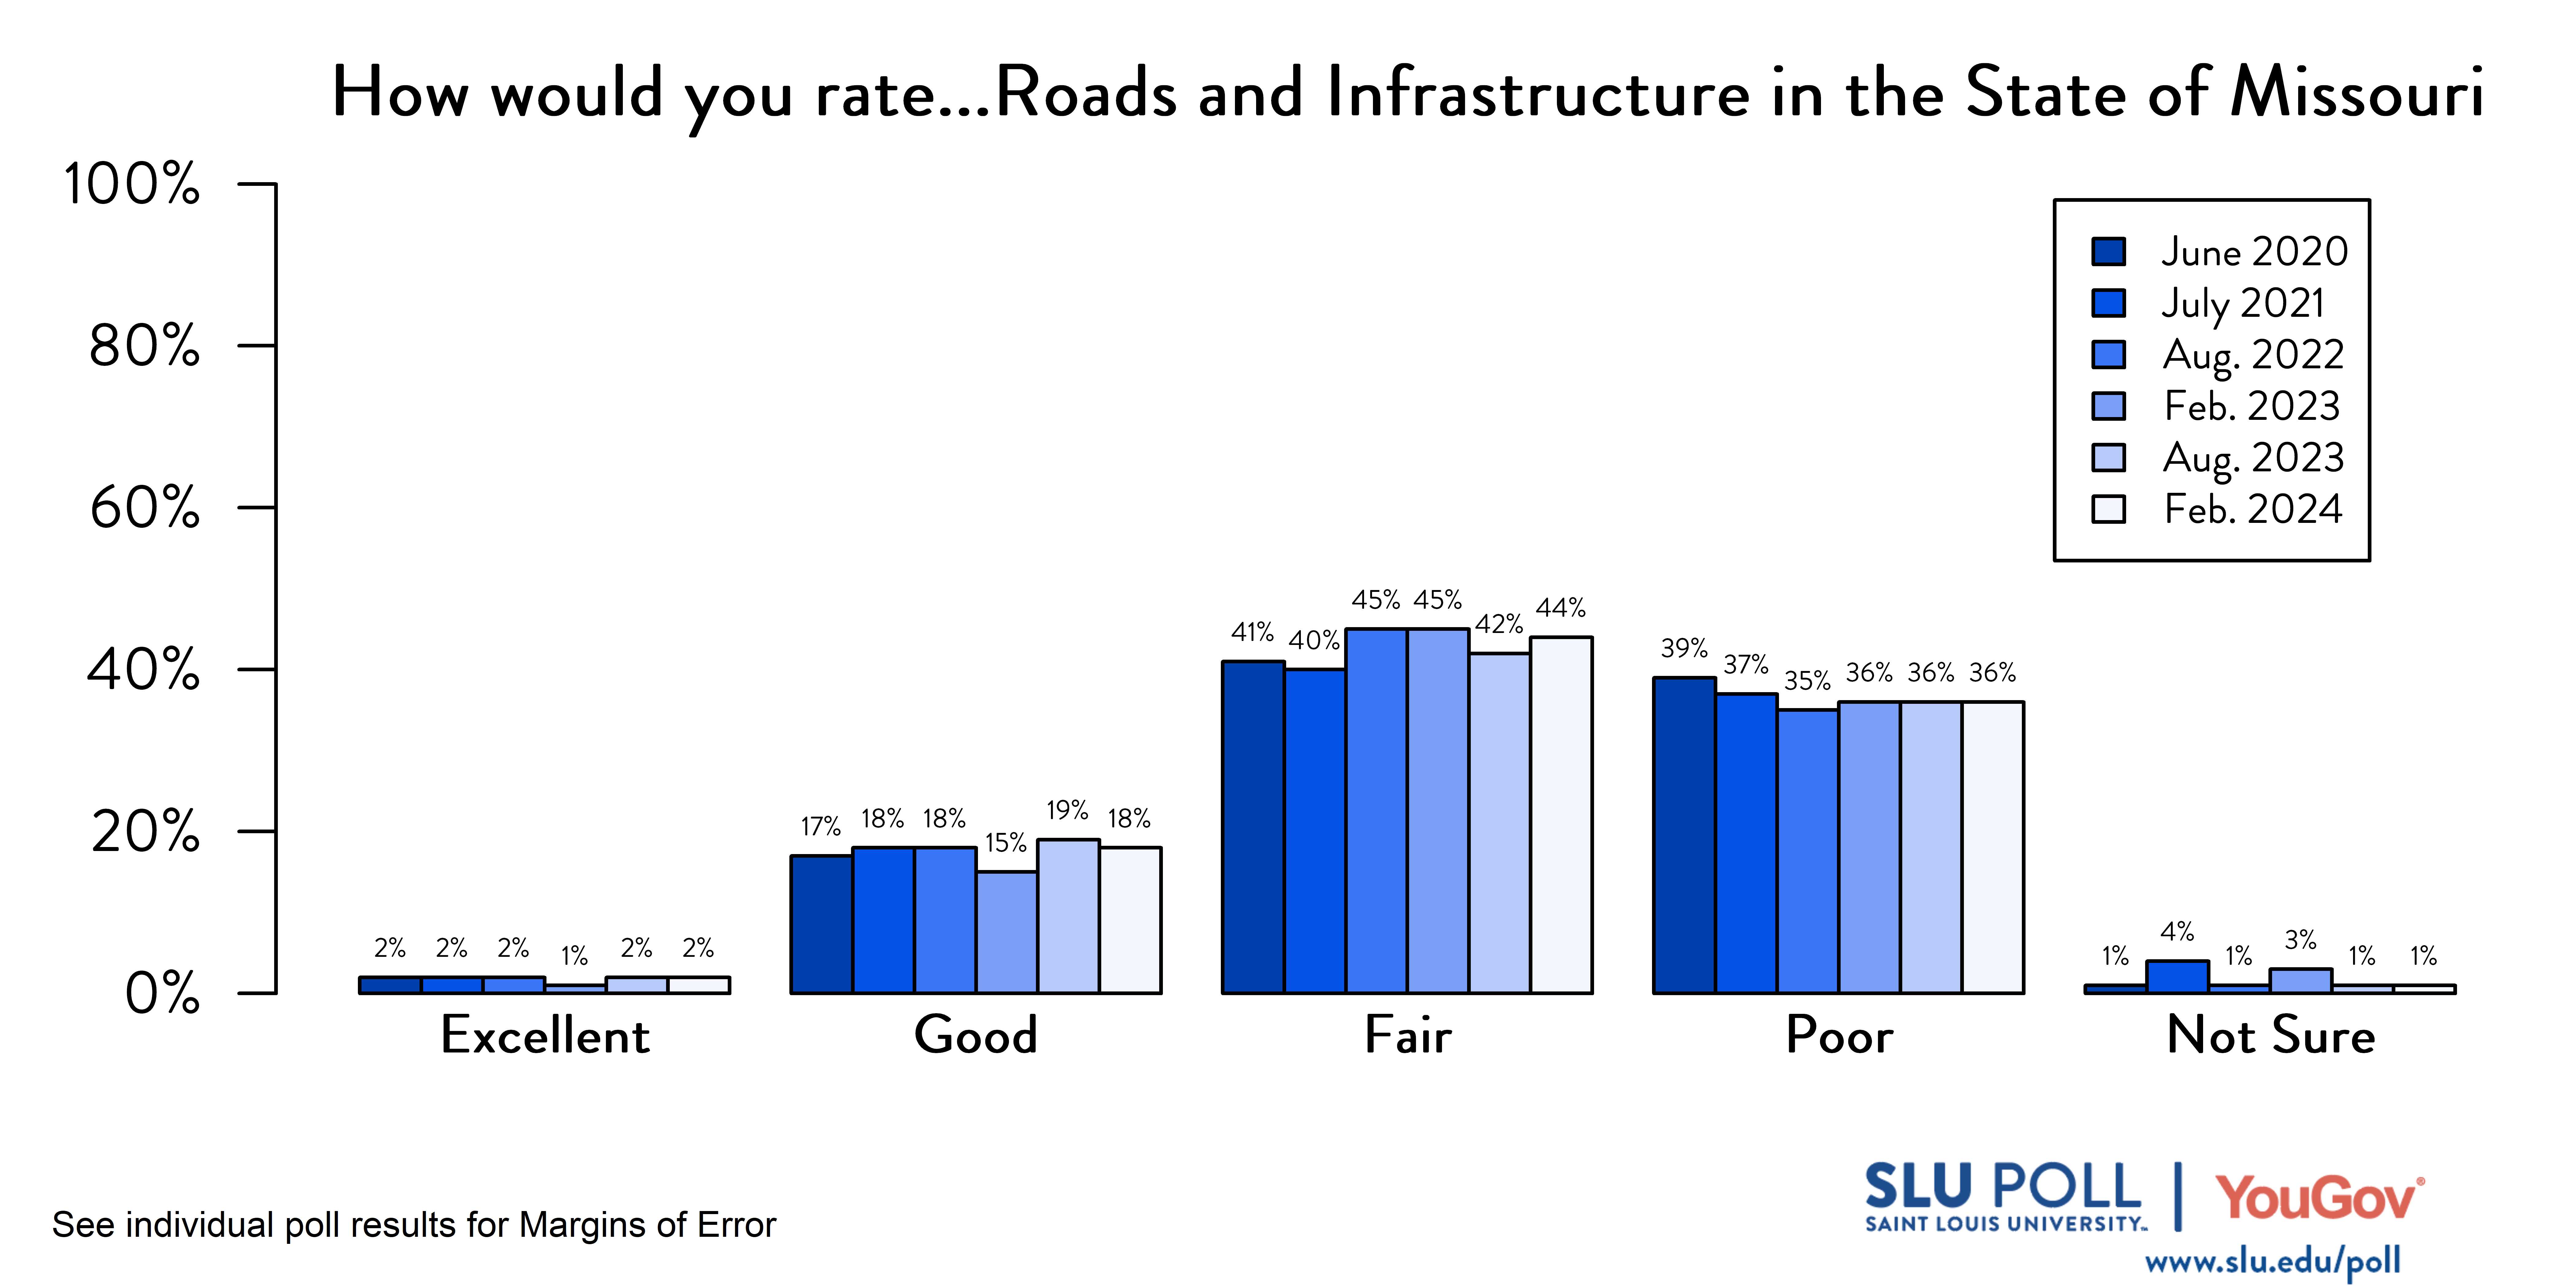 Likely voters' responses to 'How would you rate the condition of the following…Roads and infrastructure in the State of Missouri?'. June 2020 Voter Responses 2% Excellent, 17% Good, 41% Fair, 39% Poor, and 1% Not Sure. July 2021 Voter Responses: 2% Excellent, 18% Good, 40% Fair, 37% Poor, and 4% Not sure. August 2022 Voter Responses: 2% Excellent, 18% Good, 45% Fair, 35% Poor, and 1% Not sure. February 2023 Voter Responses: 1% Excellent, 15% Good, 45% Fair, 36% Poor, and 3% Not sure. August 2023 Voter Responses: 2% Excellent, 19% Good, 42% Fair, 36% Poor, and 1% Not sure.